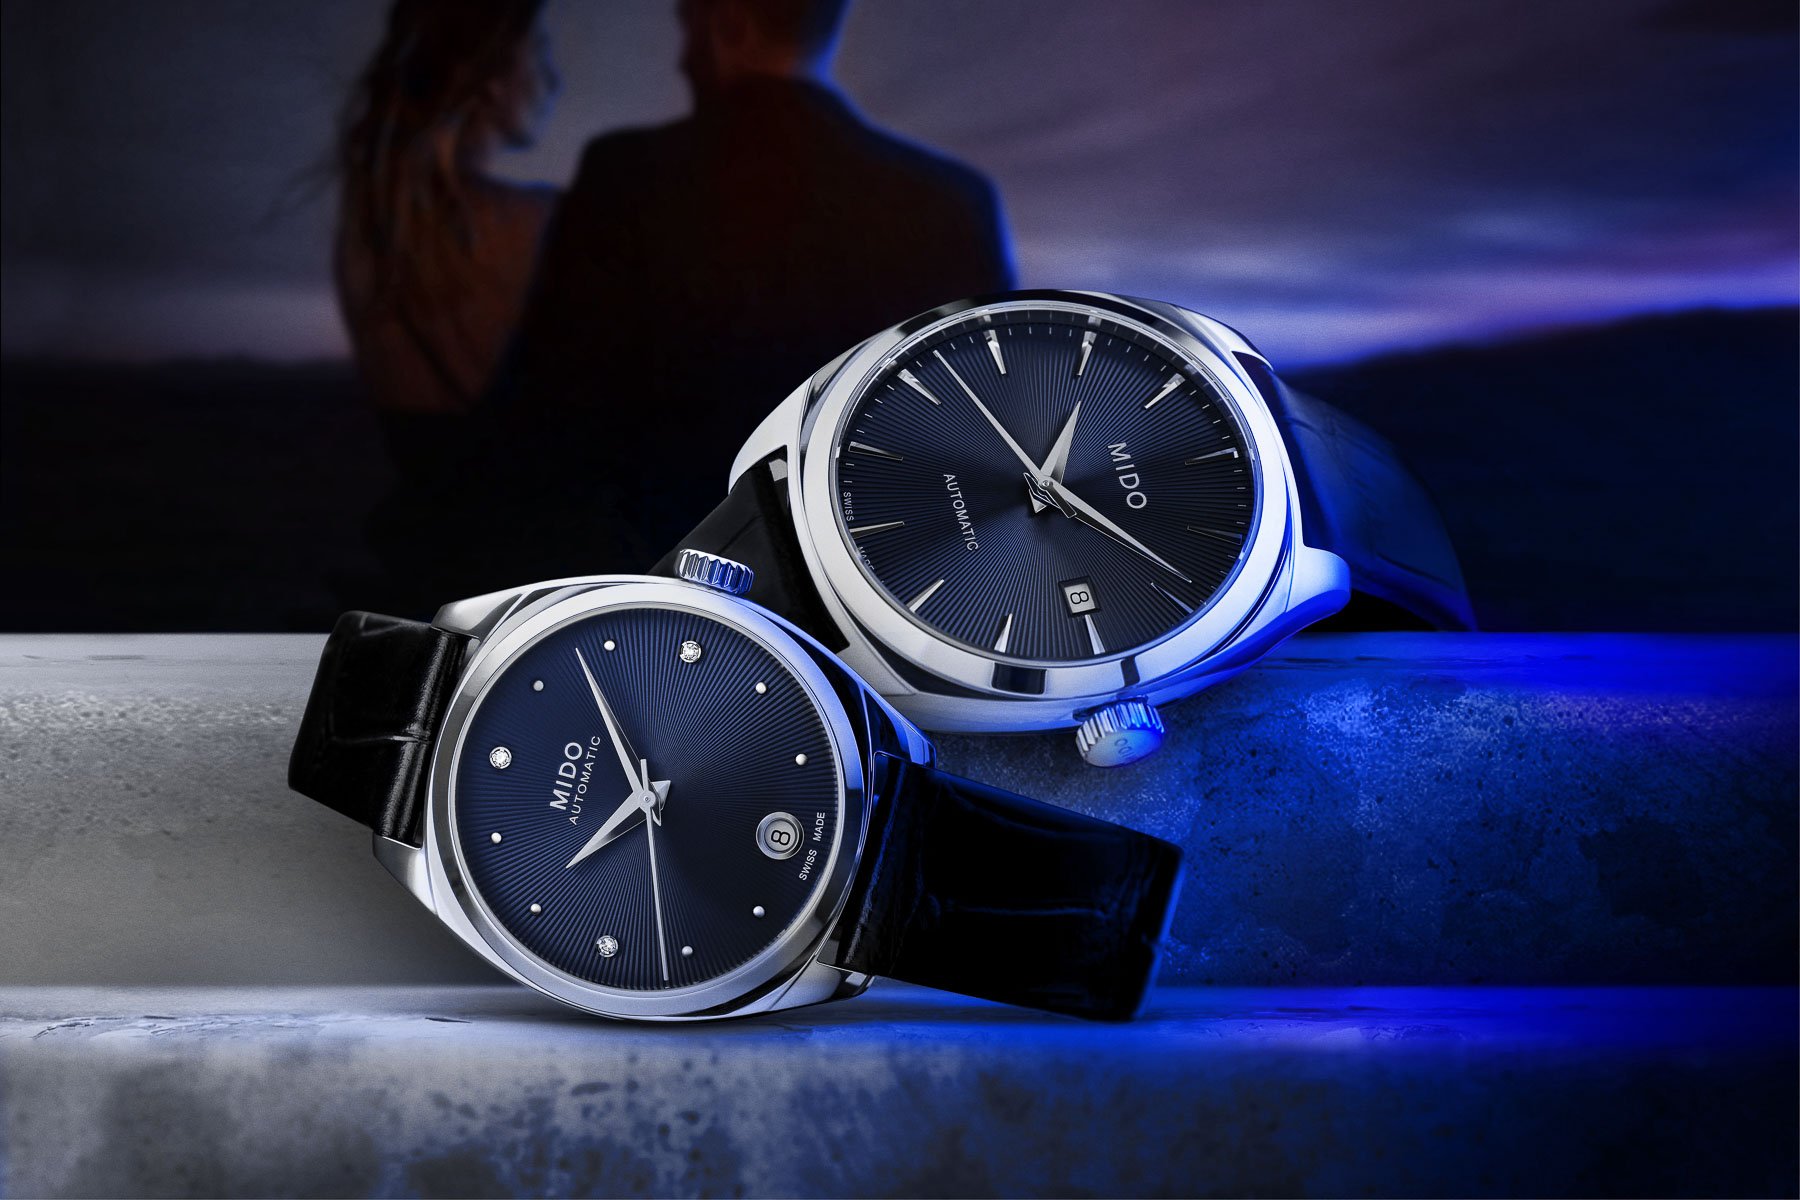 This Week in Watches: September 19, 2020 Enjoyable Edition